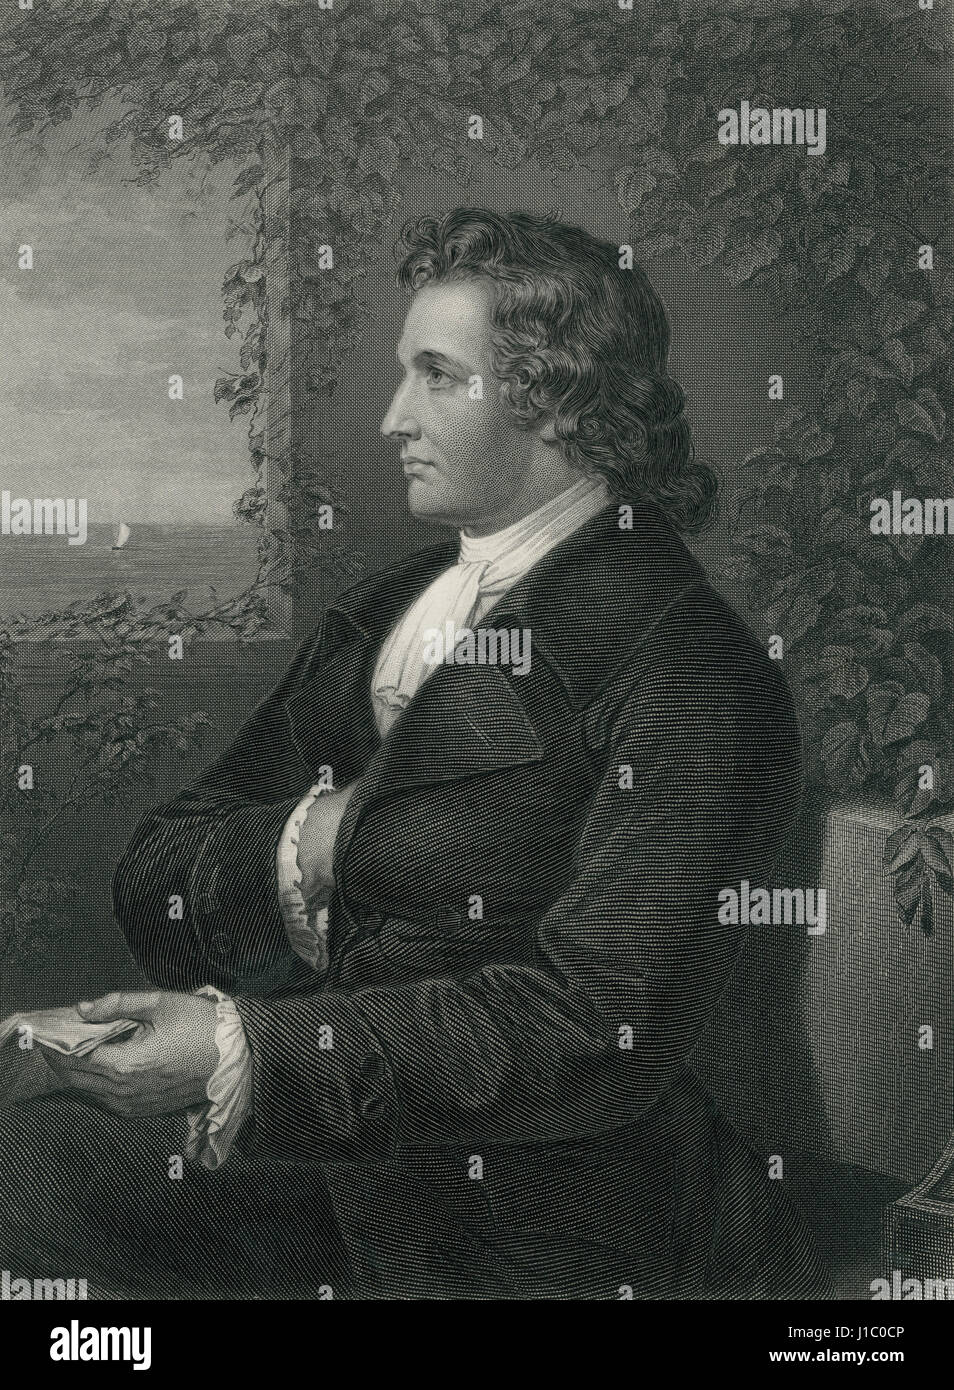 Johann Wolfgang von Goethe (1749-1832), German Writer and Statesman, Portrait, Engraving from a Photograph by Fr. Bruckmann, 1870's Stock Photo